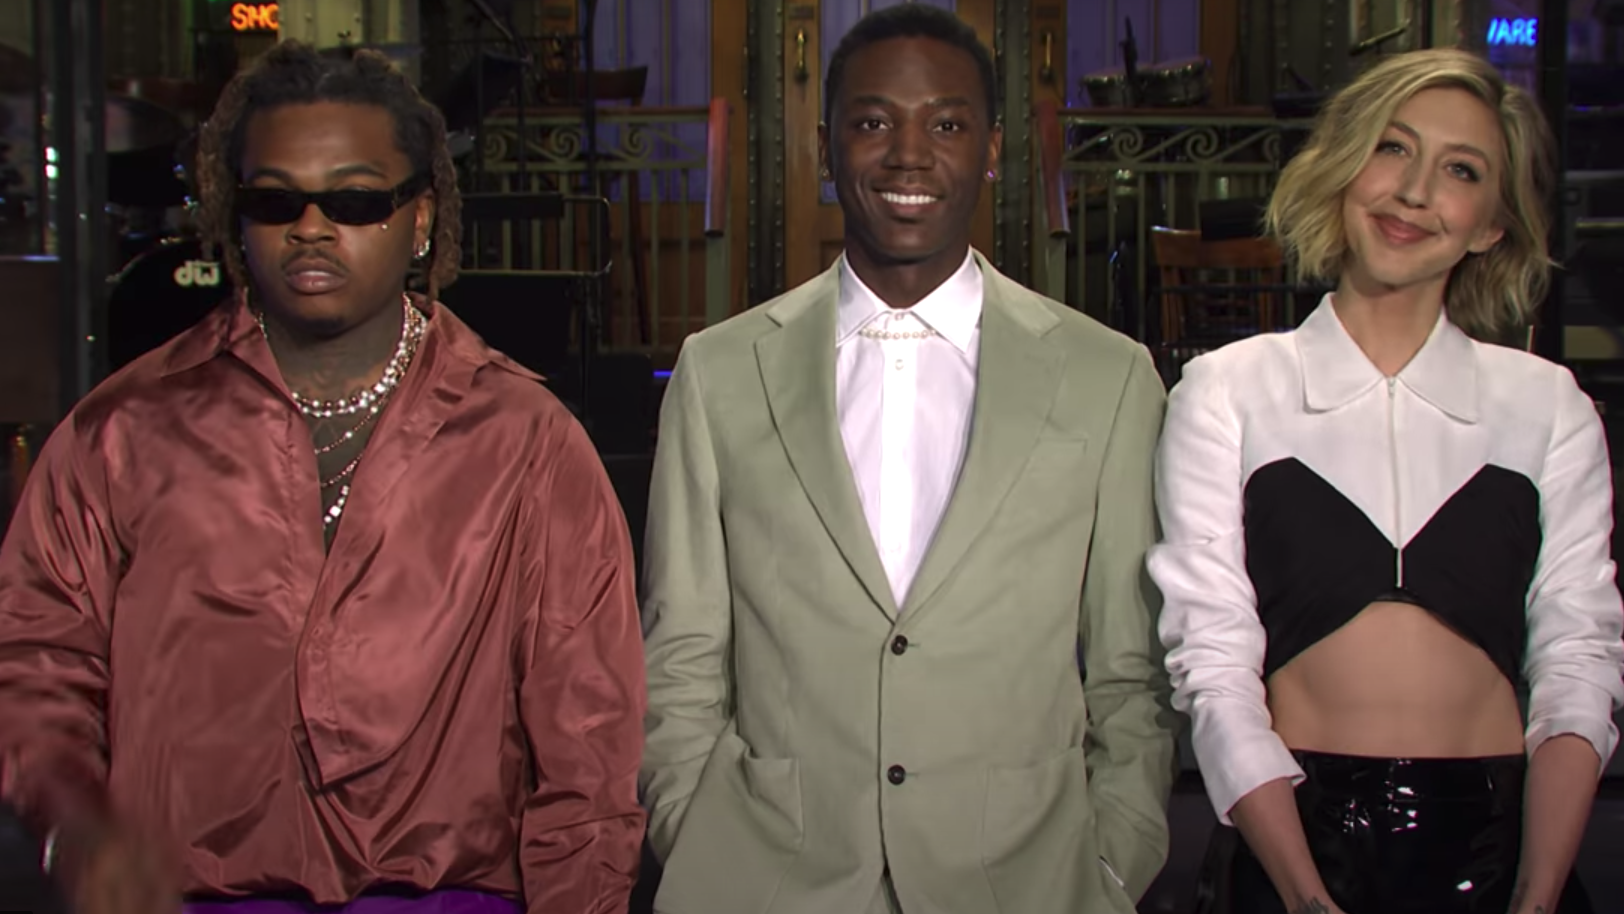 Jerrod Carmichael previews the SNL episode everyone’s waiting for